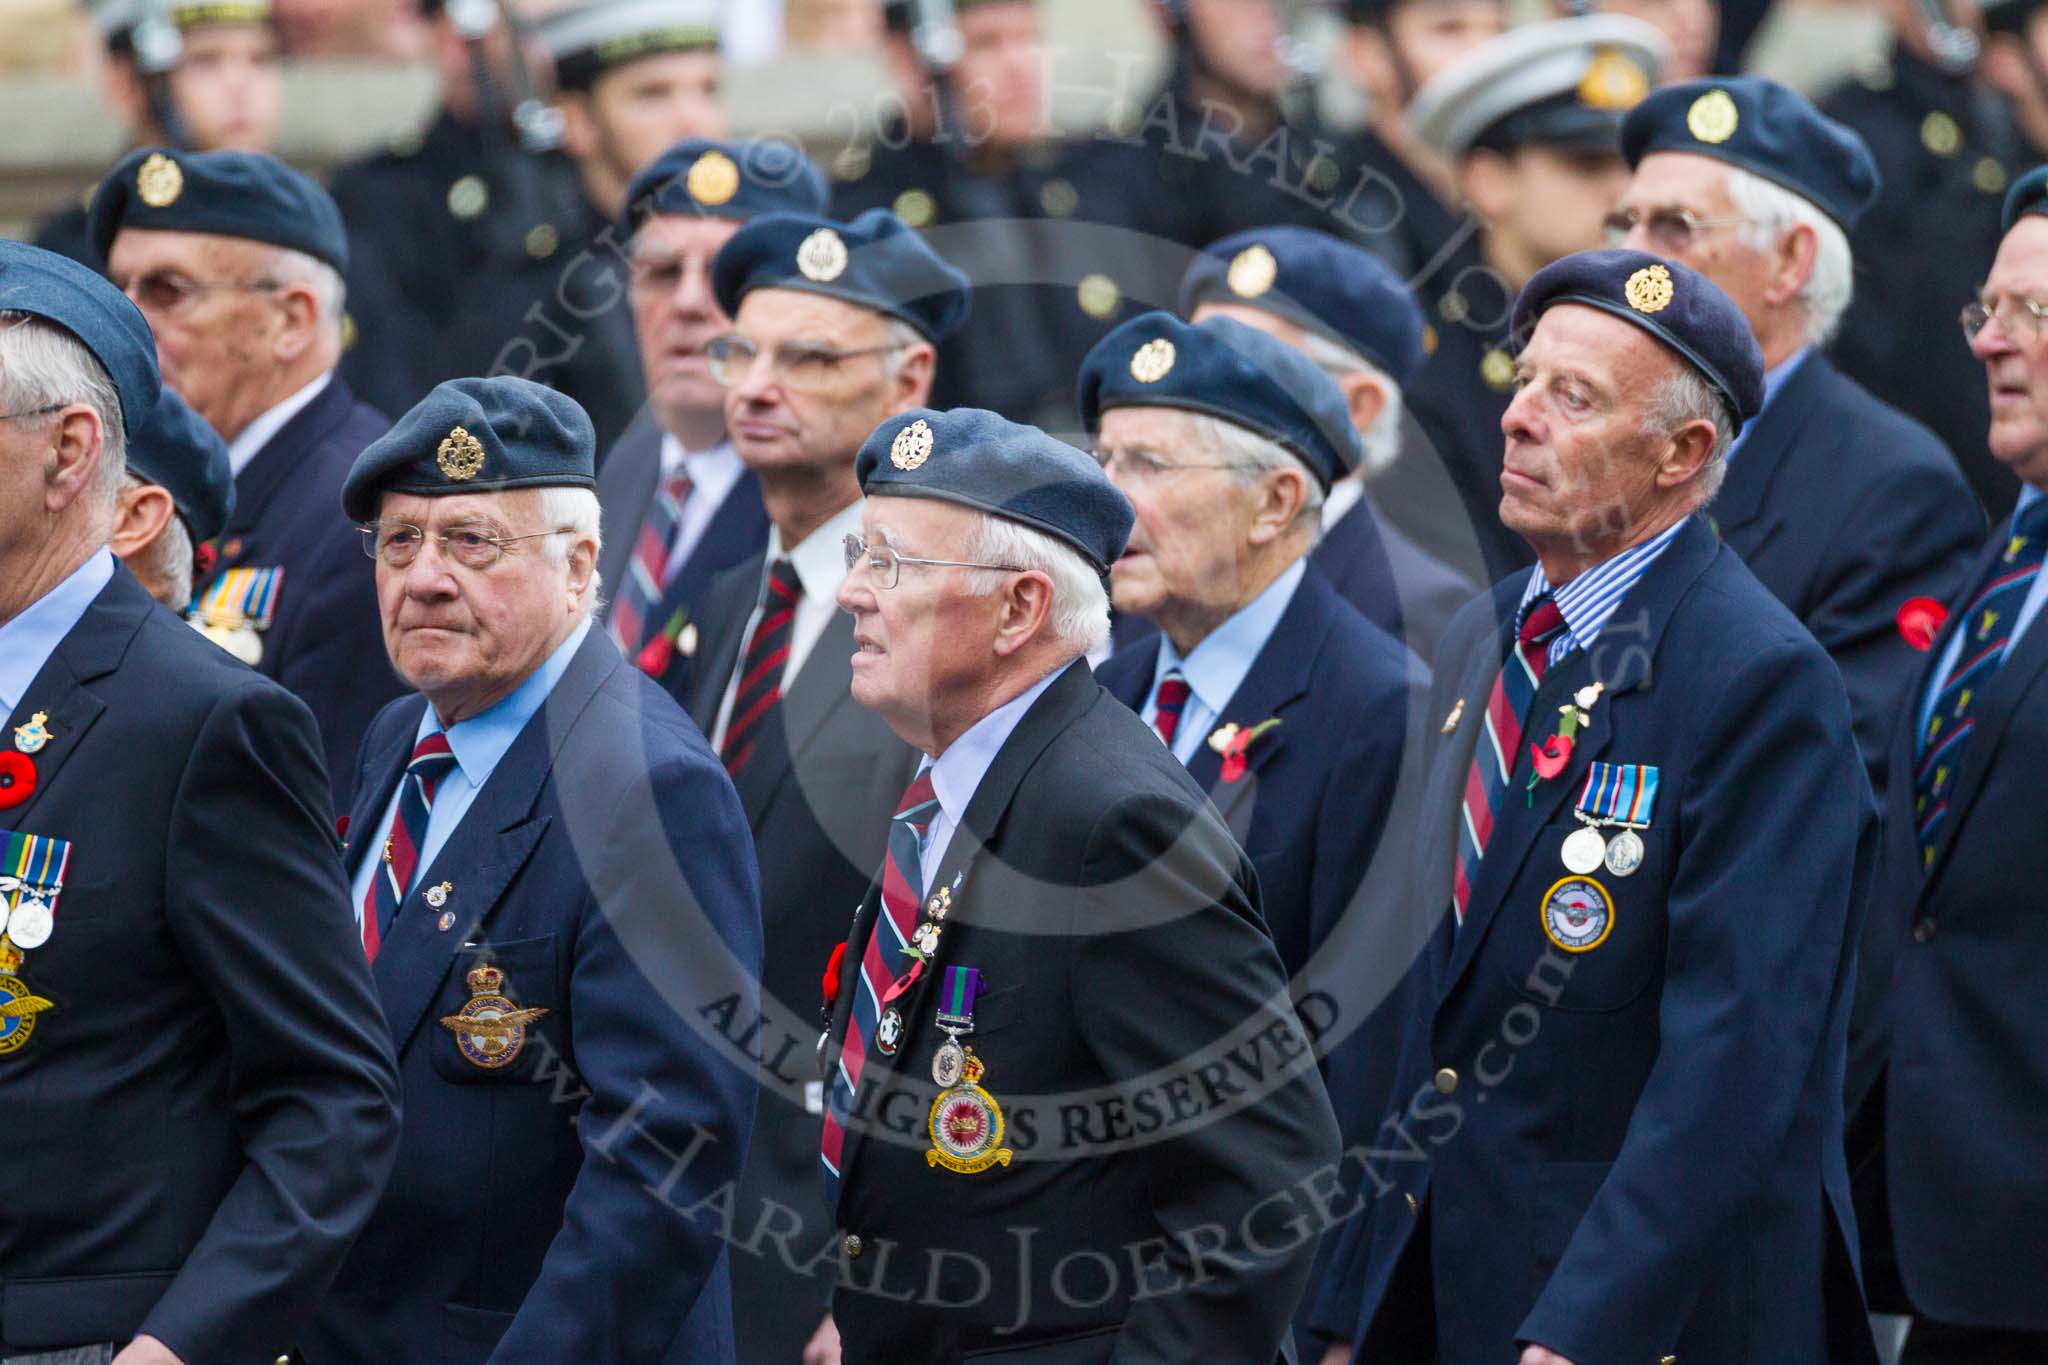 Remembrance Sunday at the Cenotaph 2015: Group C5, National Service (Royal Air Force) Association.
Cenotaph, Whitehall, London SW1,
London,
Greater London,
United Kingdom,
on 08 November 2015 at 11:48, image #460